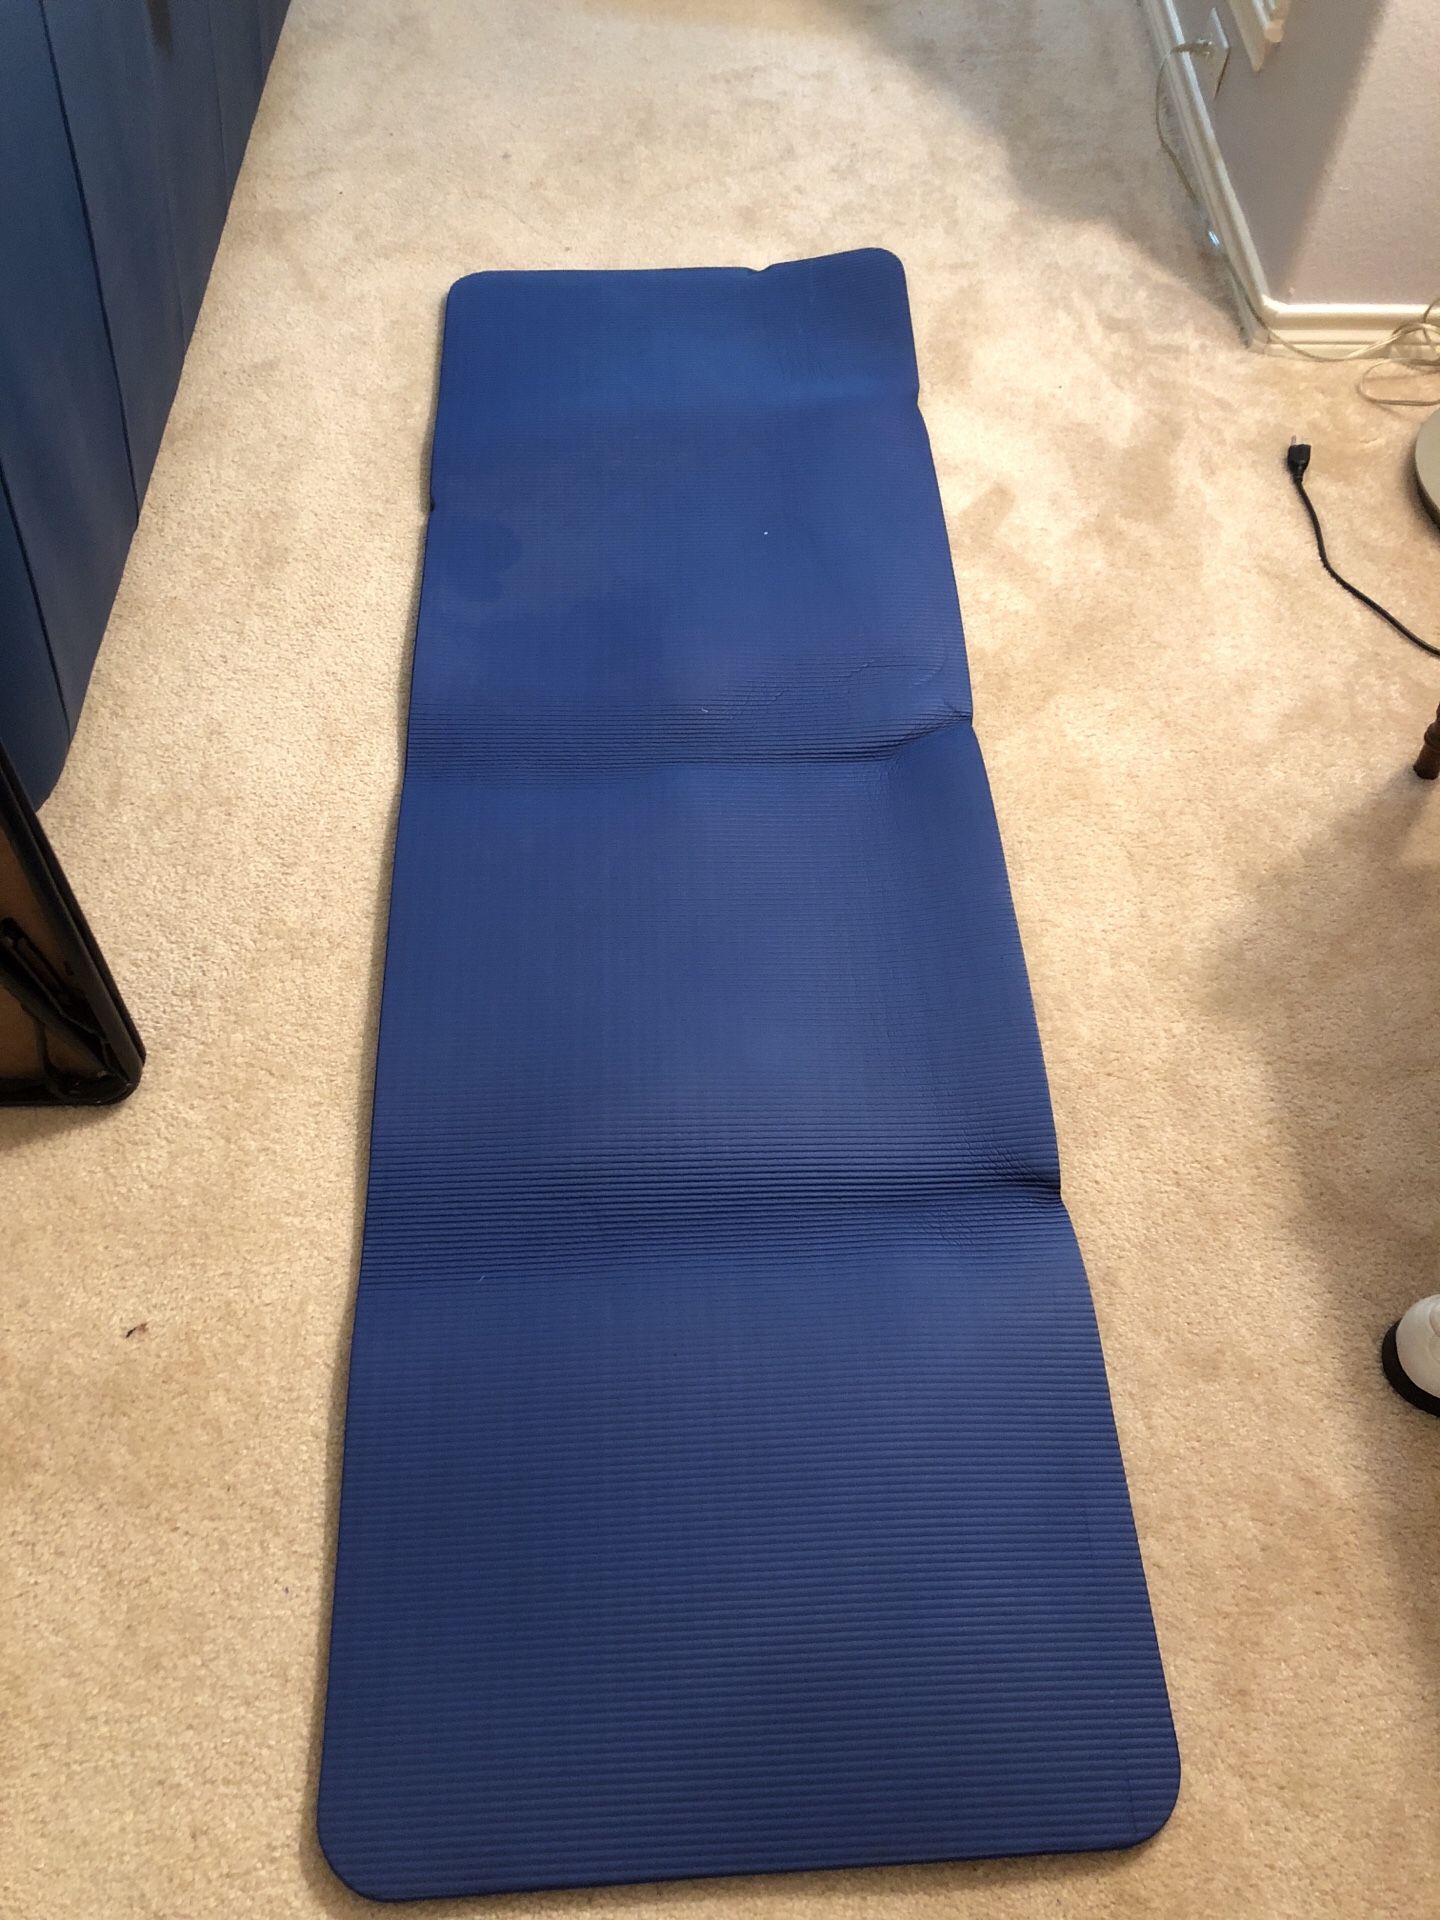 Harbinger Exercise Mat! Only used to watch TV